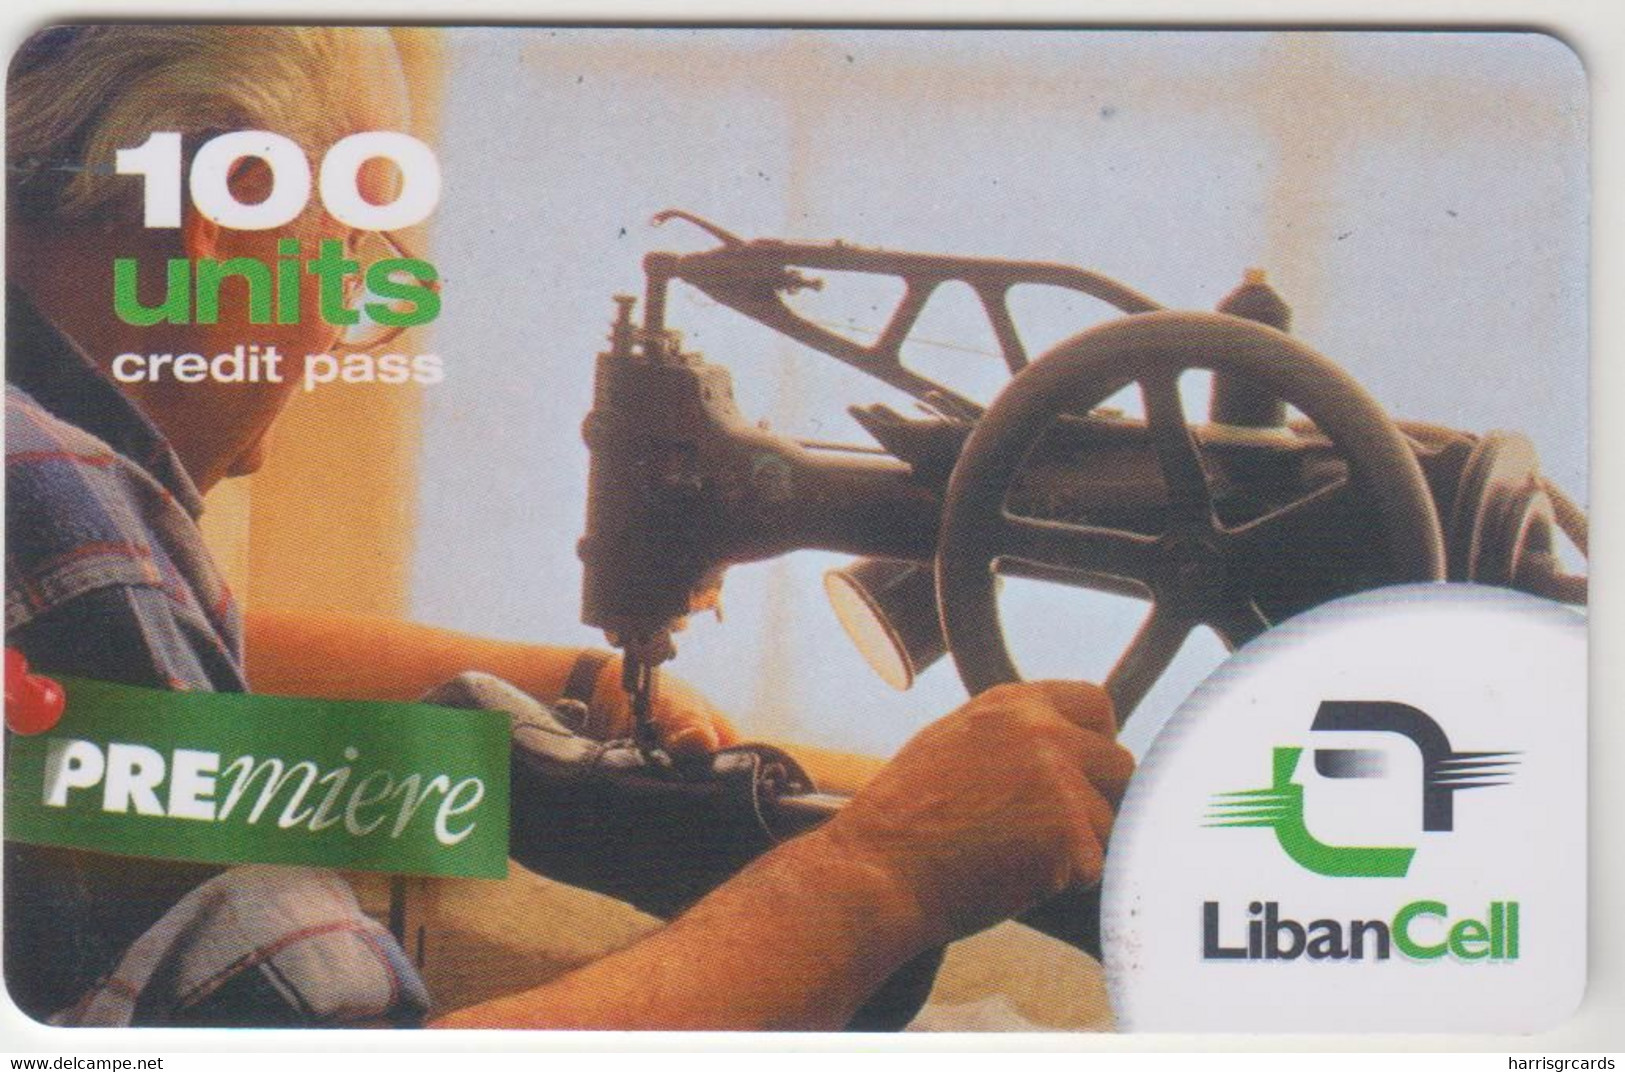 LEBANON - Premiere - Sewing Machine, Libancell Recharge Card 100 Units, Exp.date 27/01/06, Used - Libano